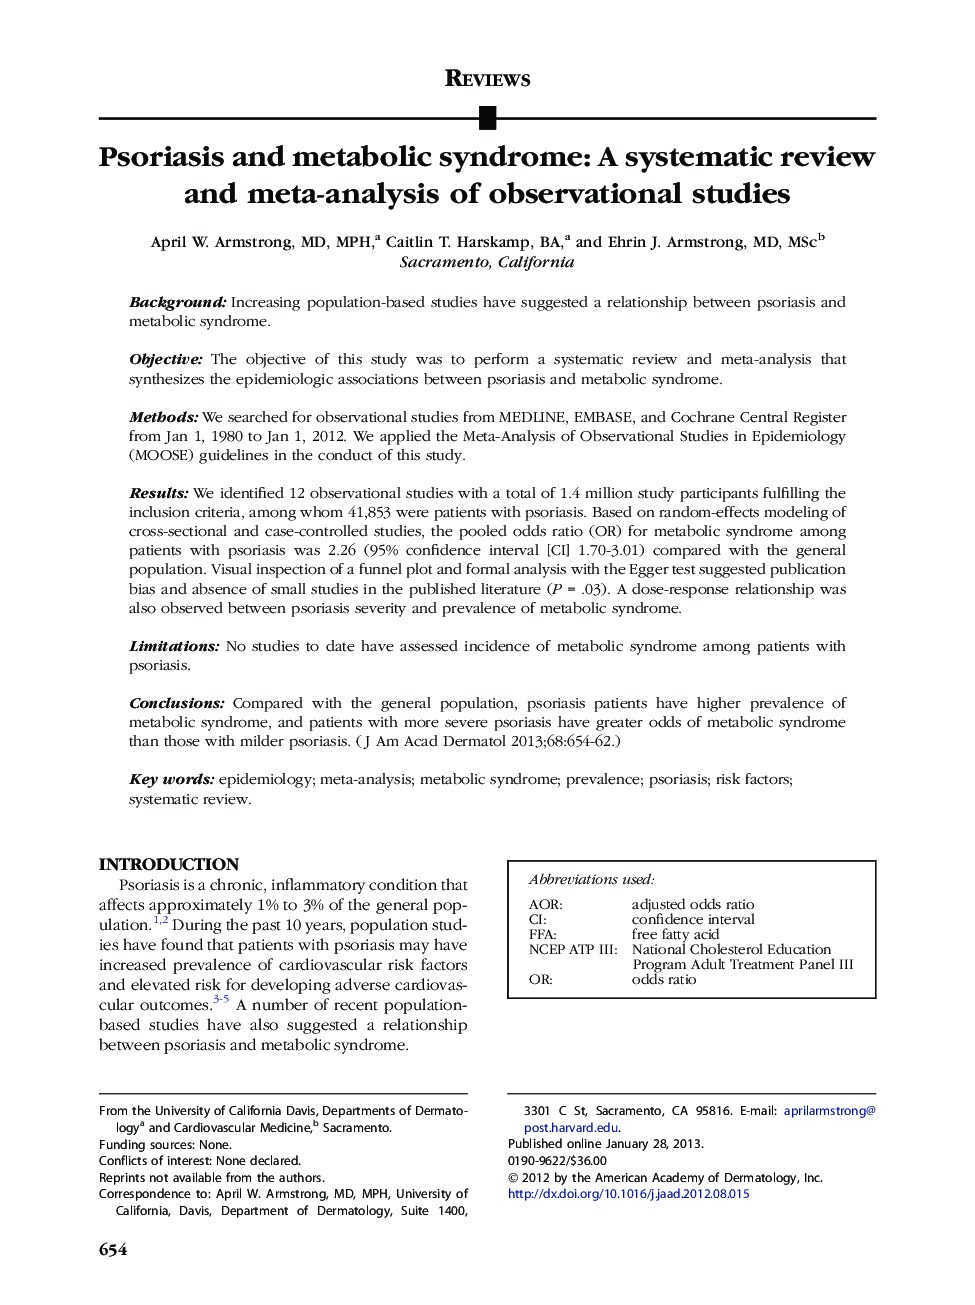 Psoriasis and metabolic syndrome: A systematic review and meta-analysis of observational studies 